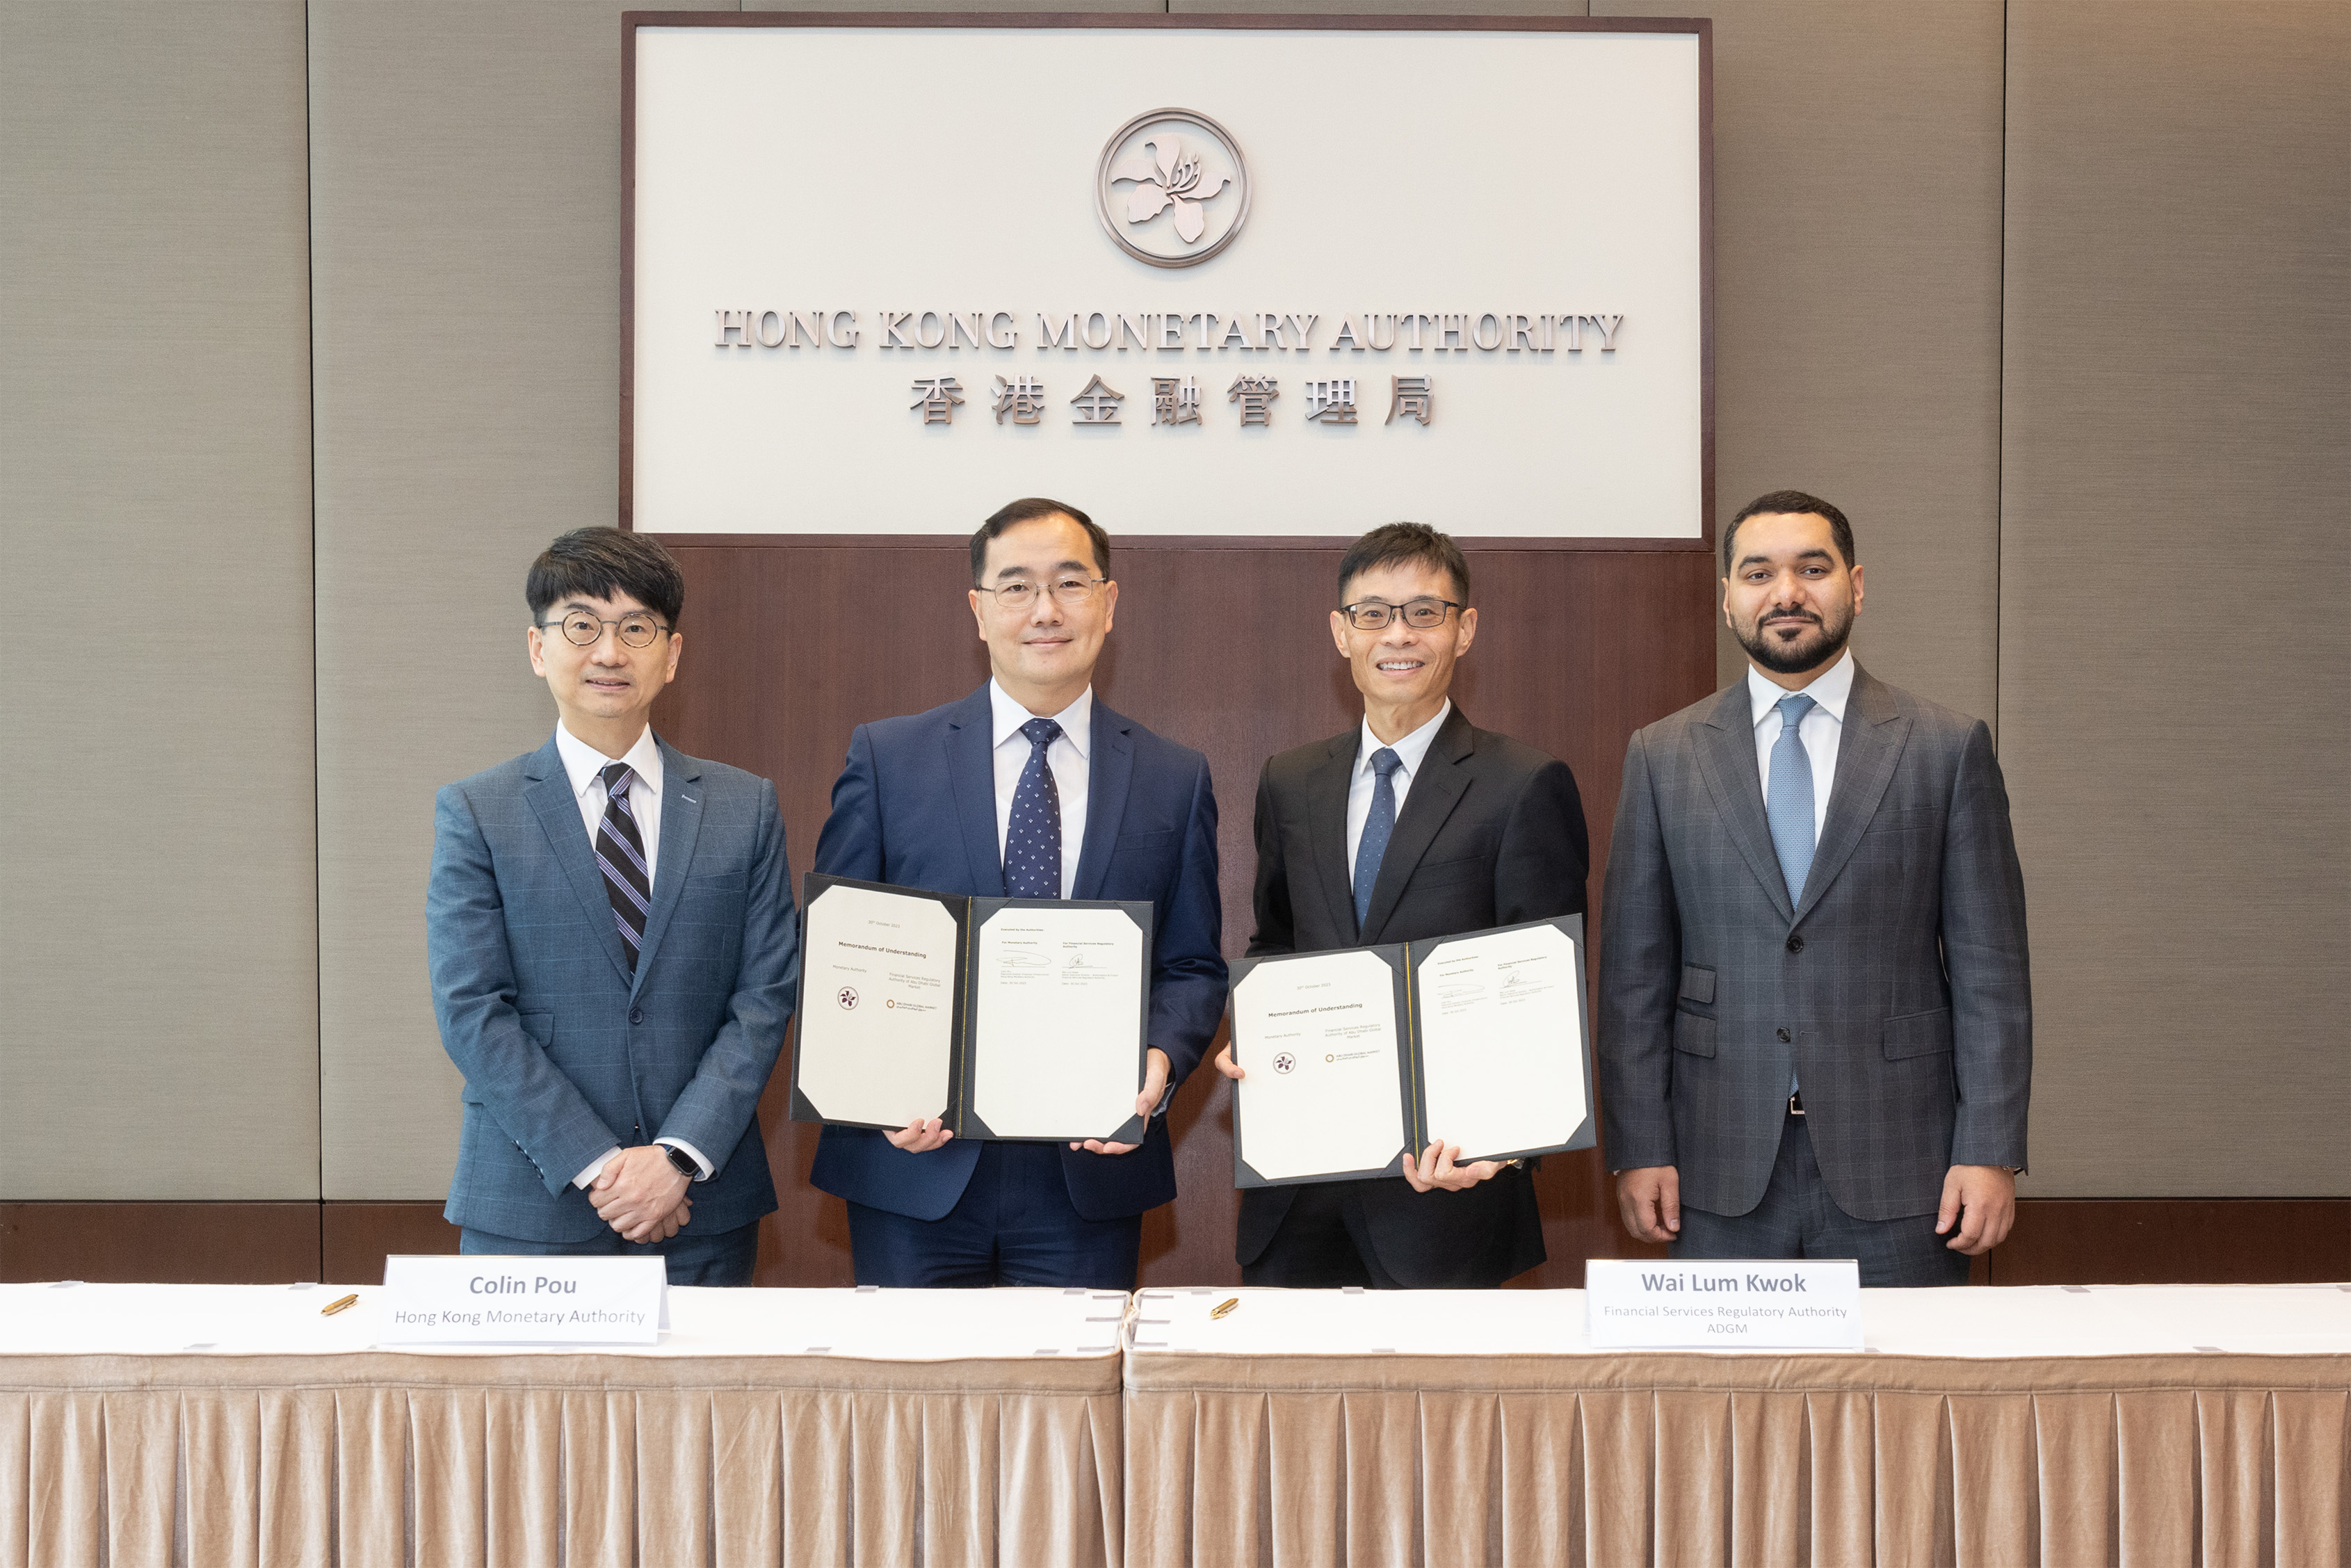 (From left) The Memorandum of Understanding signing ceremony is attended by Mr Nelson Chow, Head (Financial Market Infrastructure Service) of the Hong Kong Monetary Authority (HKMA); Mr Colin Pou, Executive Director (Financial Infrastructure) of the HKMA; Mr Wai Lum Kwok, Senior Executive Director - Authorisation & Fintech of the Financial Services Regulatory Authority; and H.E. Shaikh Saoud Al Mualla, Consul-General of the United Arab Emirates in the Hong Kong Special Administrative Region.